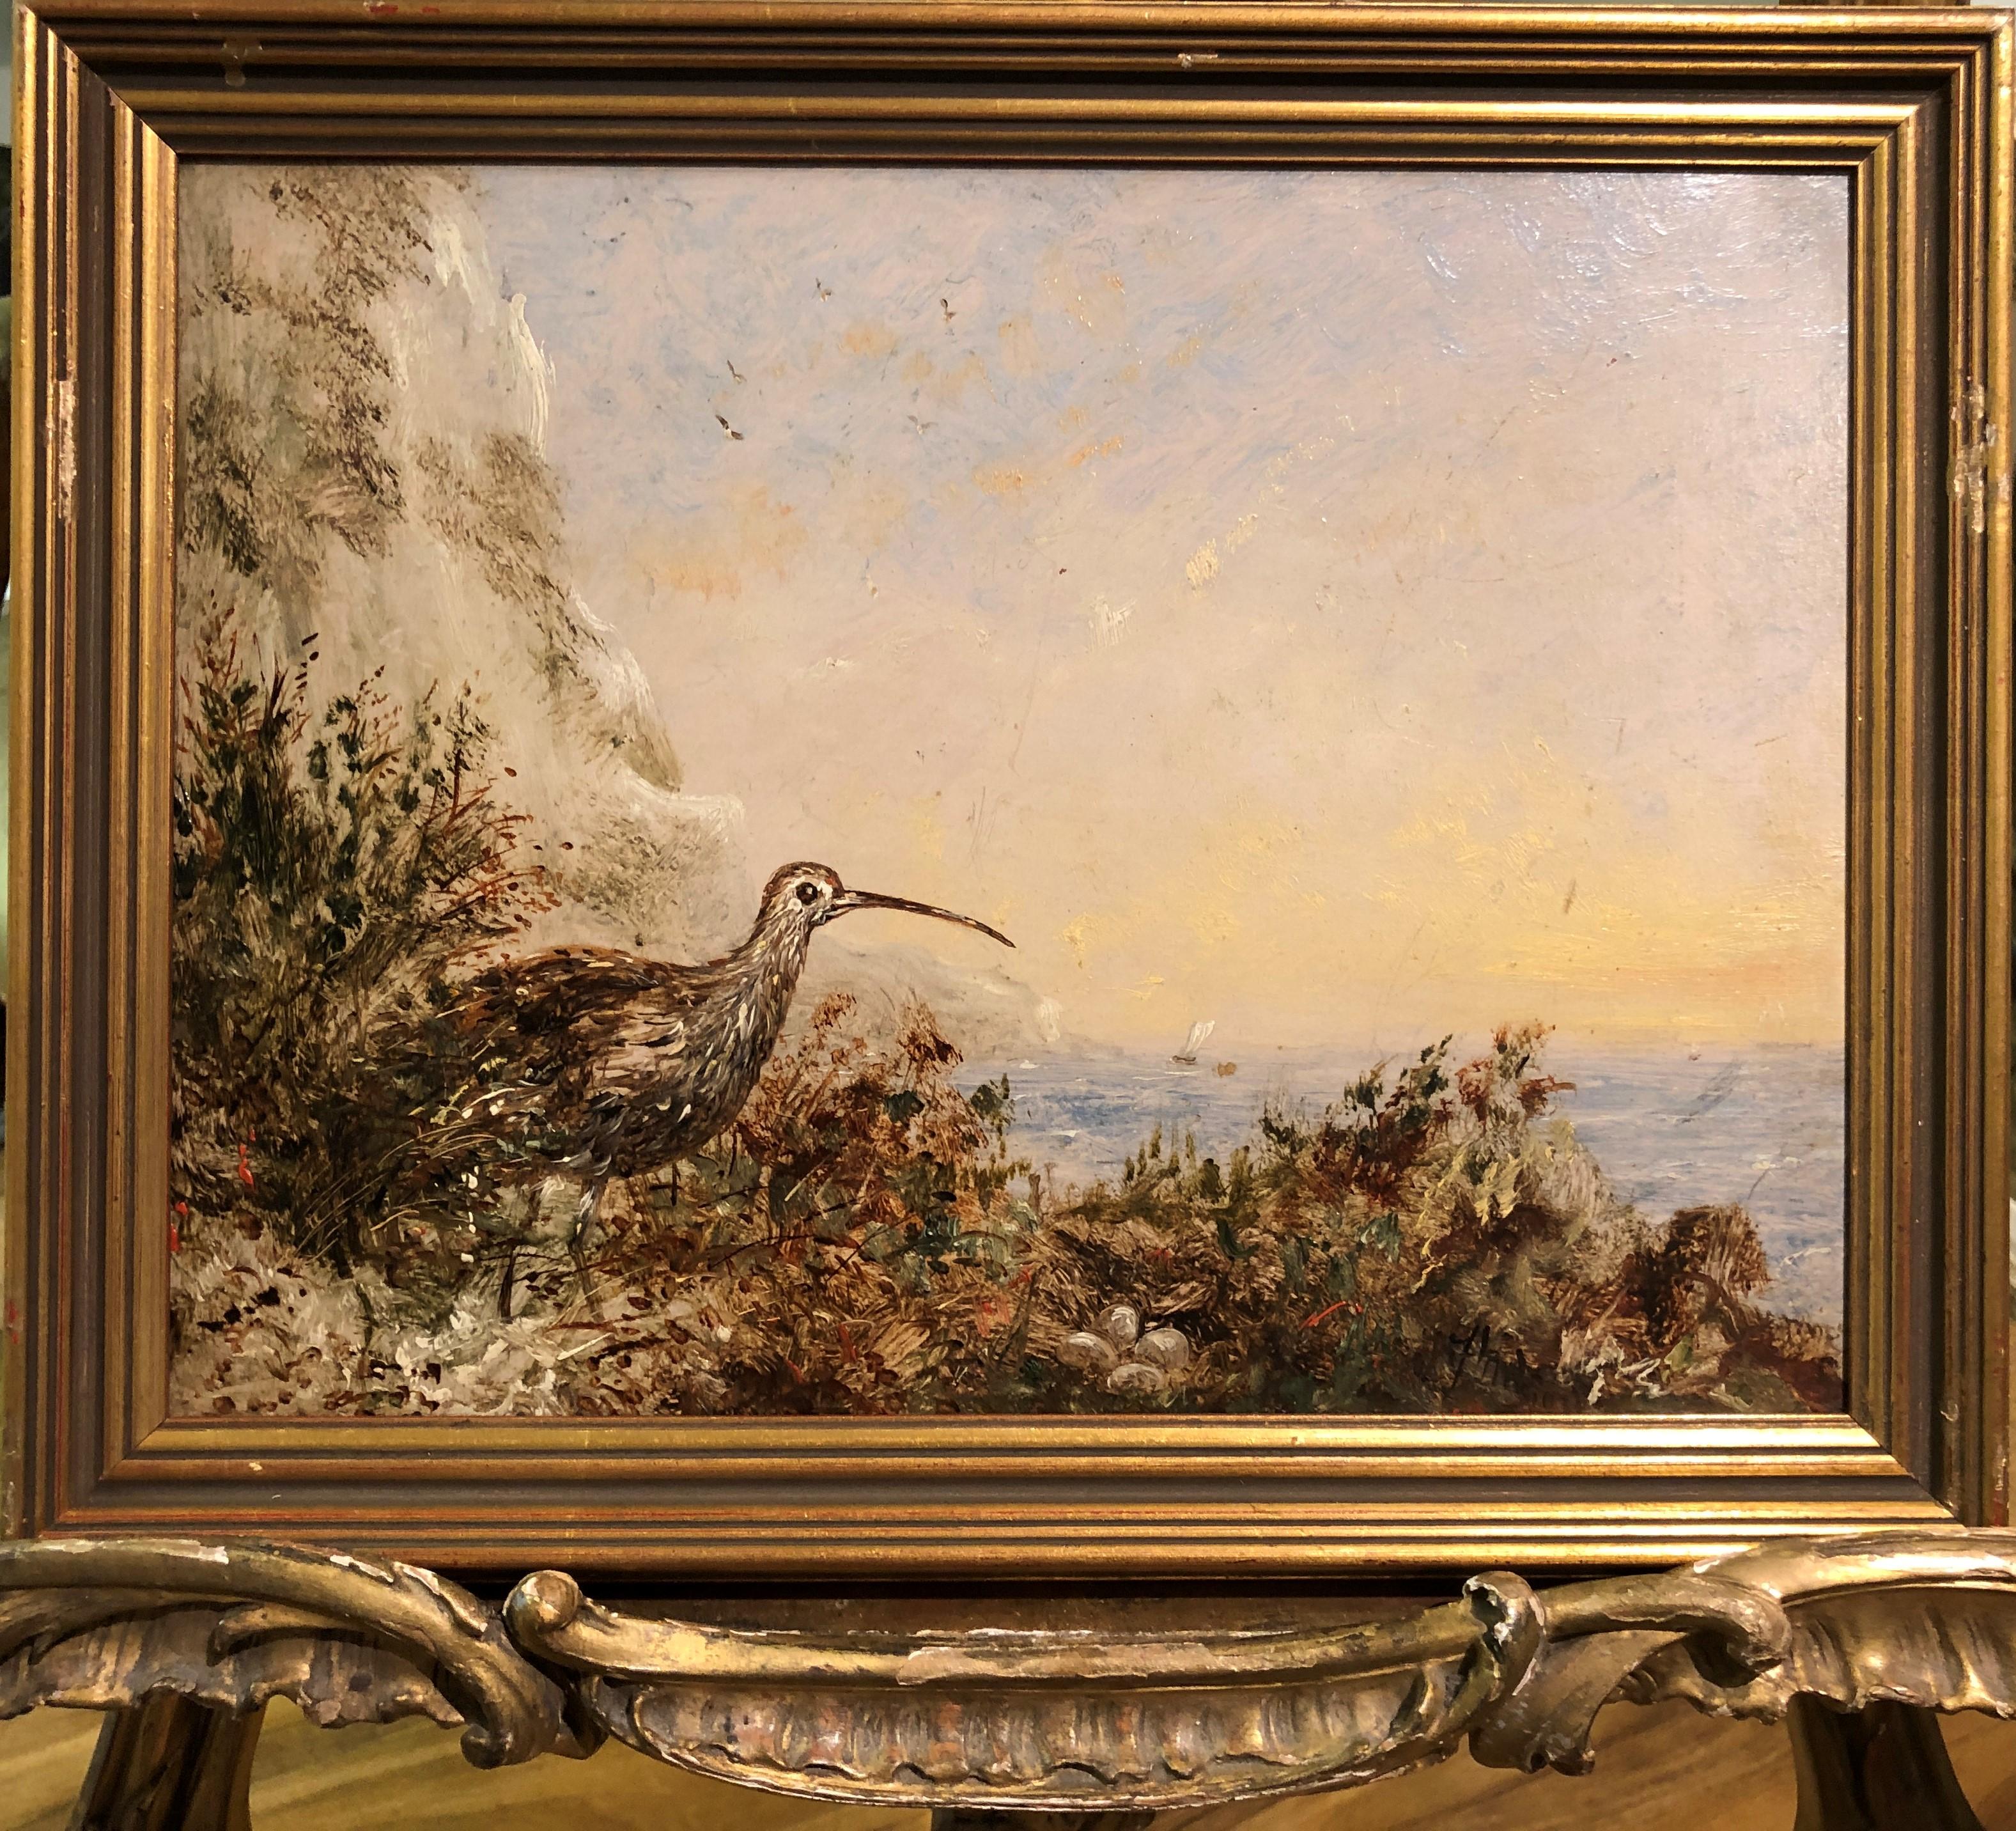 Unknown Landscape Painting - SMALL RARE OIL PAINTING ANTIQUE BIRD STUDY 19th Century Fine Quality Piece GGF